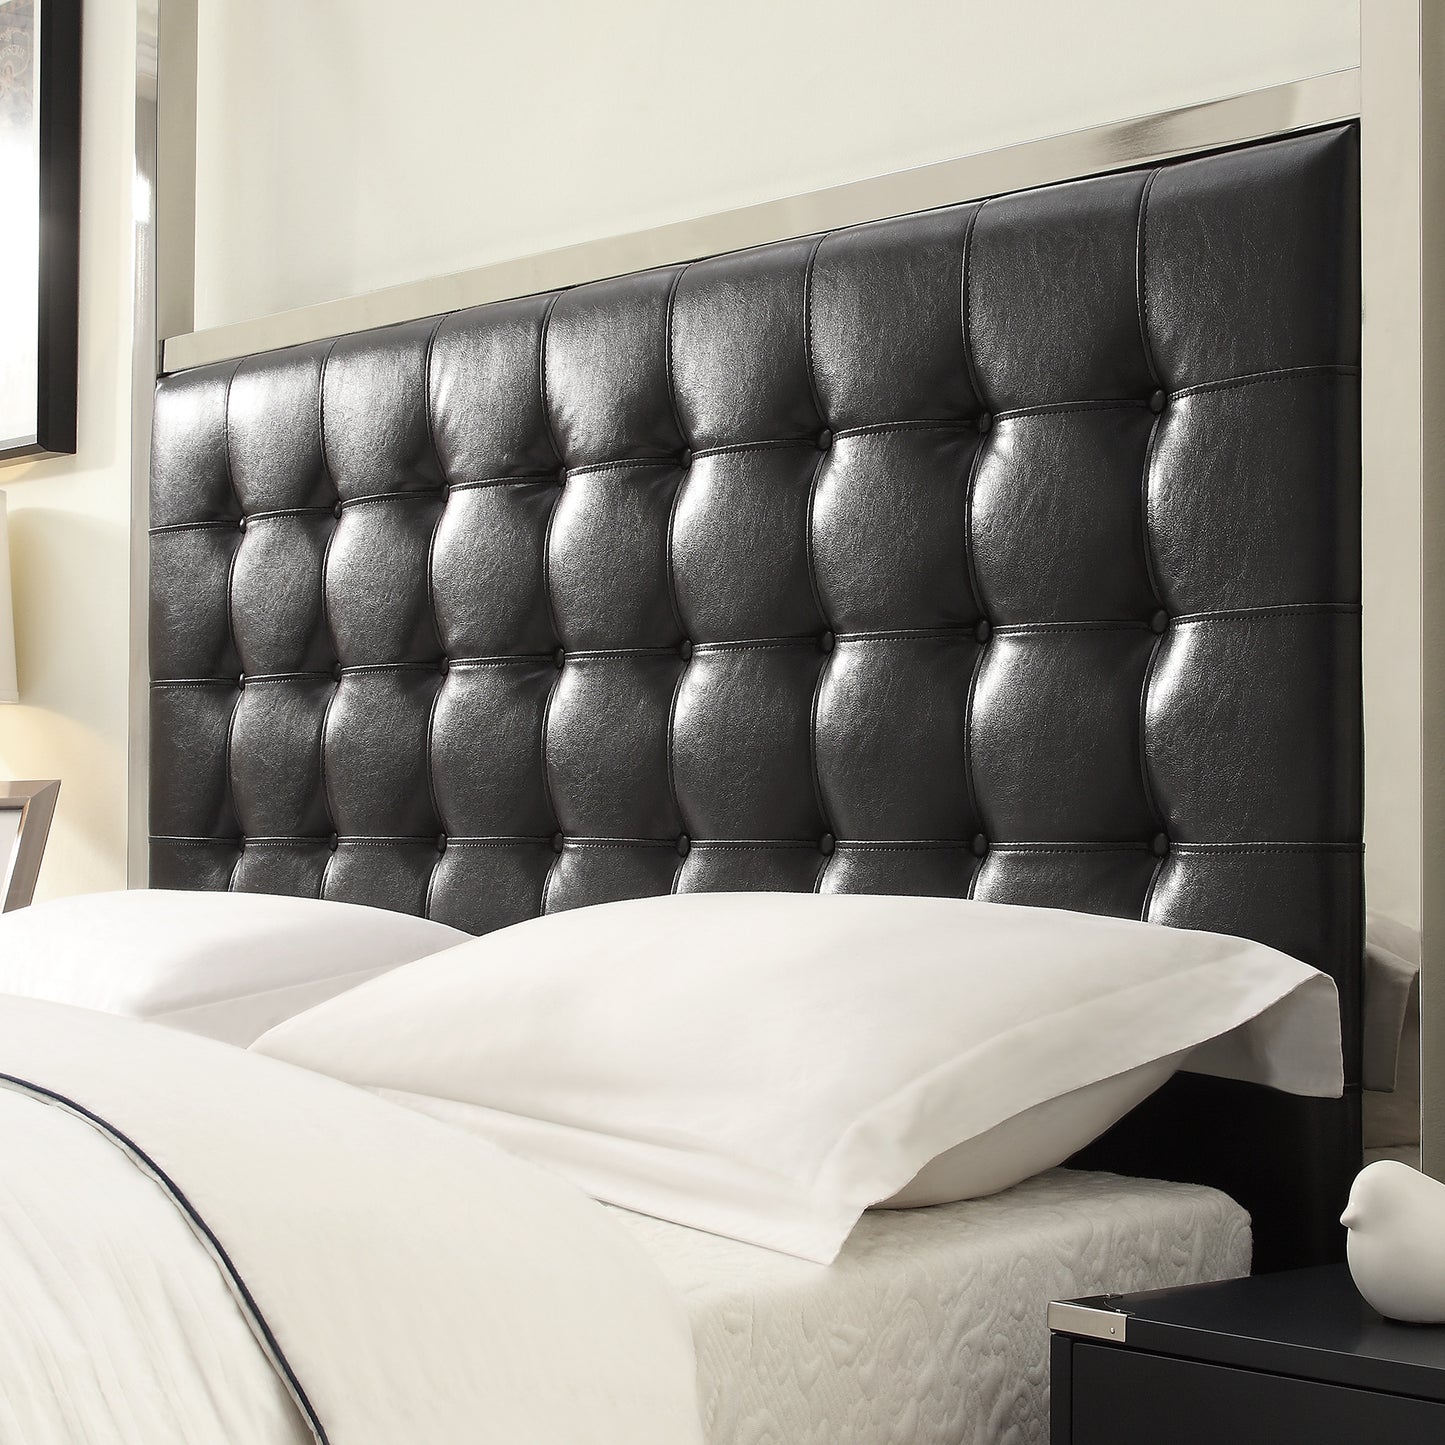 Metal Canopy Bed with Upholstered Headboard - Black Bonded Leather, Chrome Finish, Queen Size